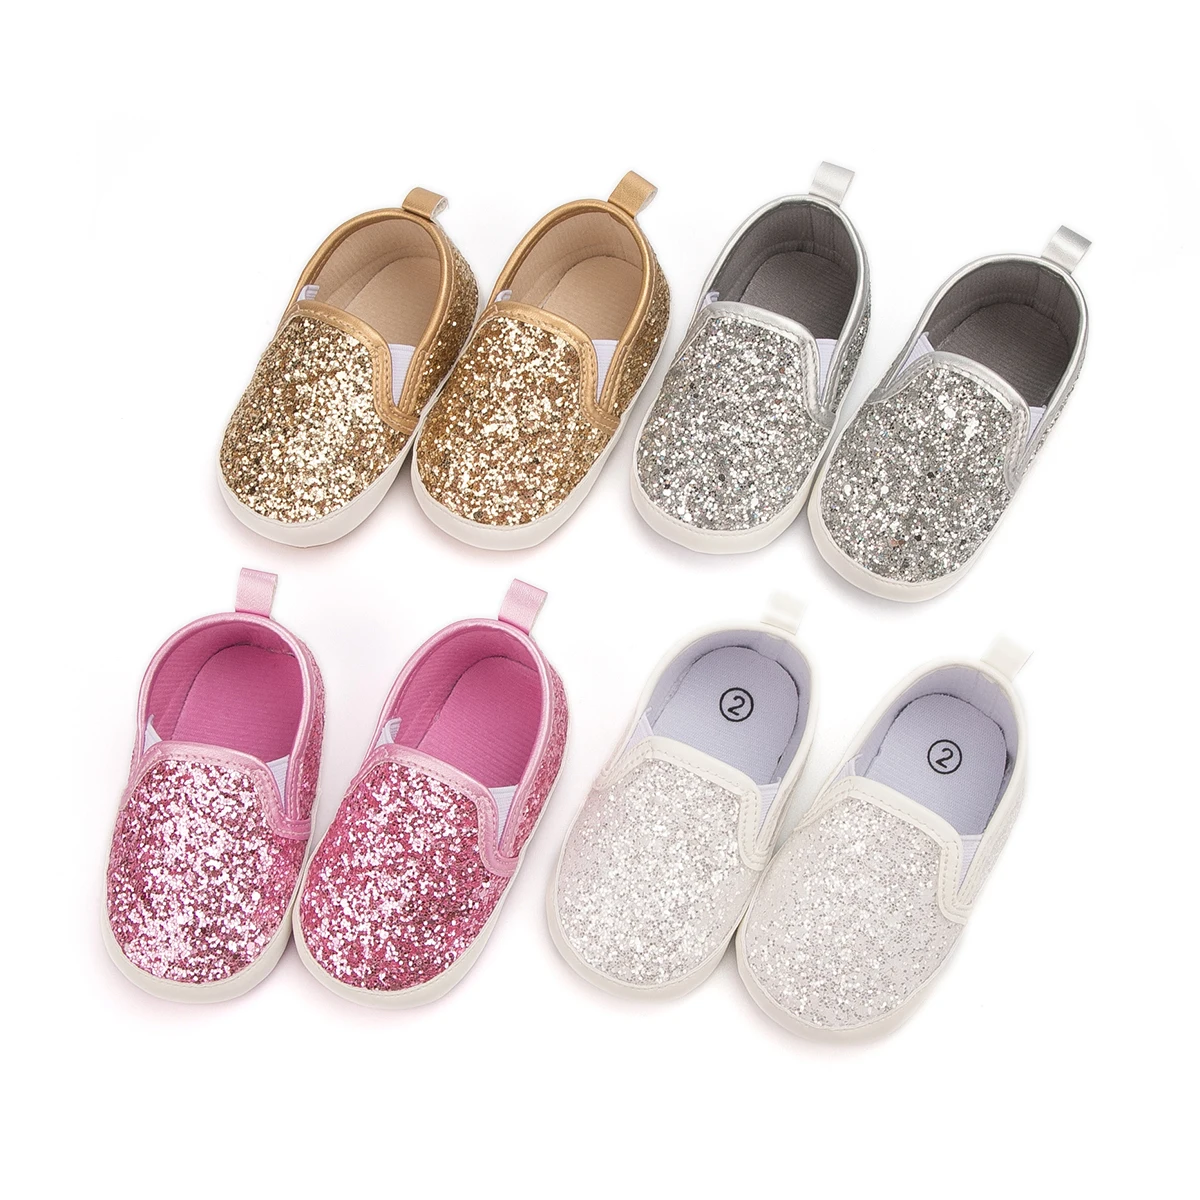 MOQ 1 New arrival Casual commfortable Soft sole 0-18 months baby toddler boy girl baby shoes soft sole, 4 colors